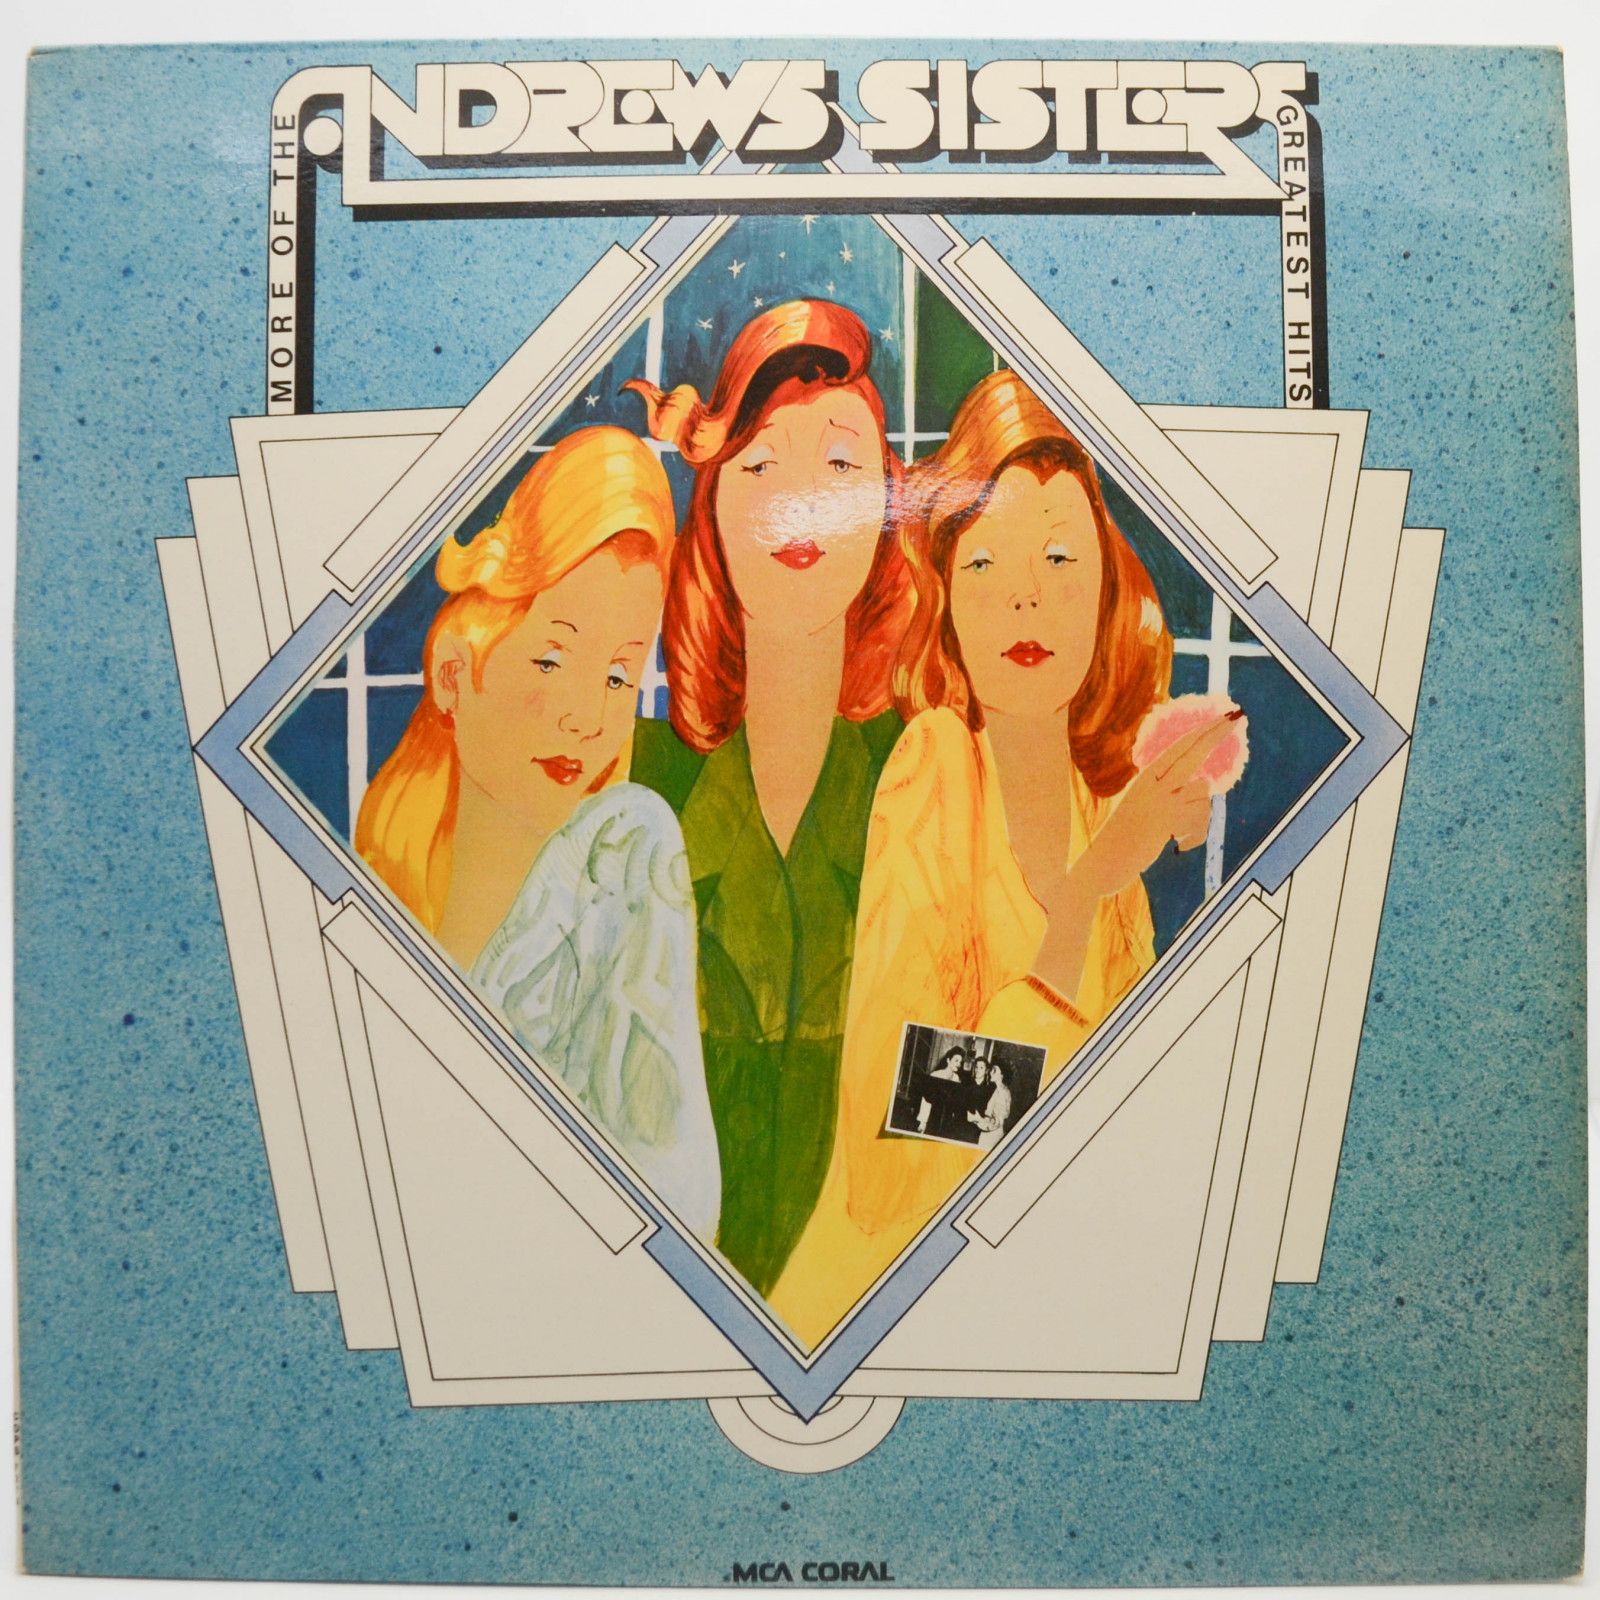 Andrews Sisters — More Of The Andrew Sisters' Greatest Hits, 1973